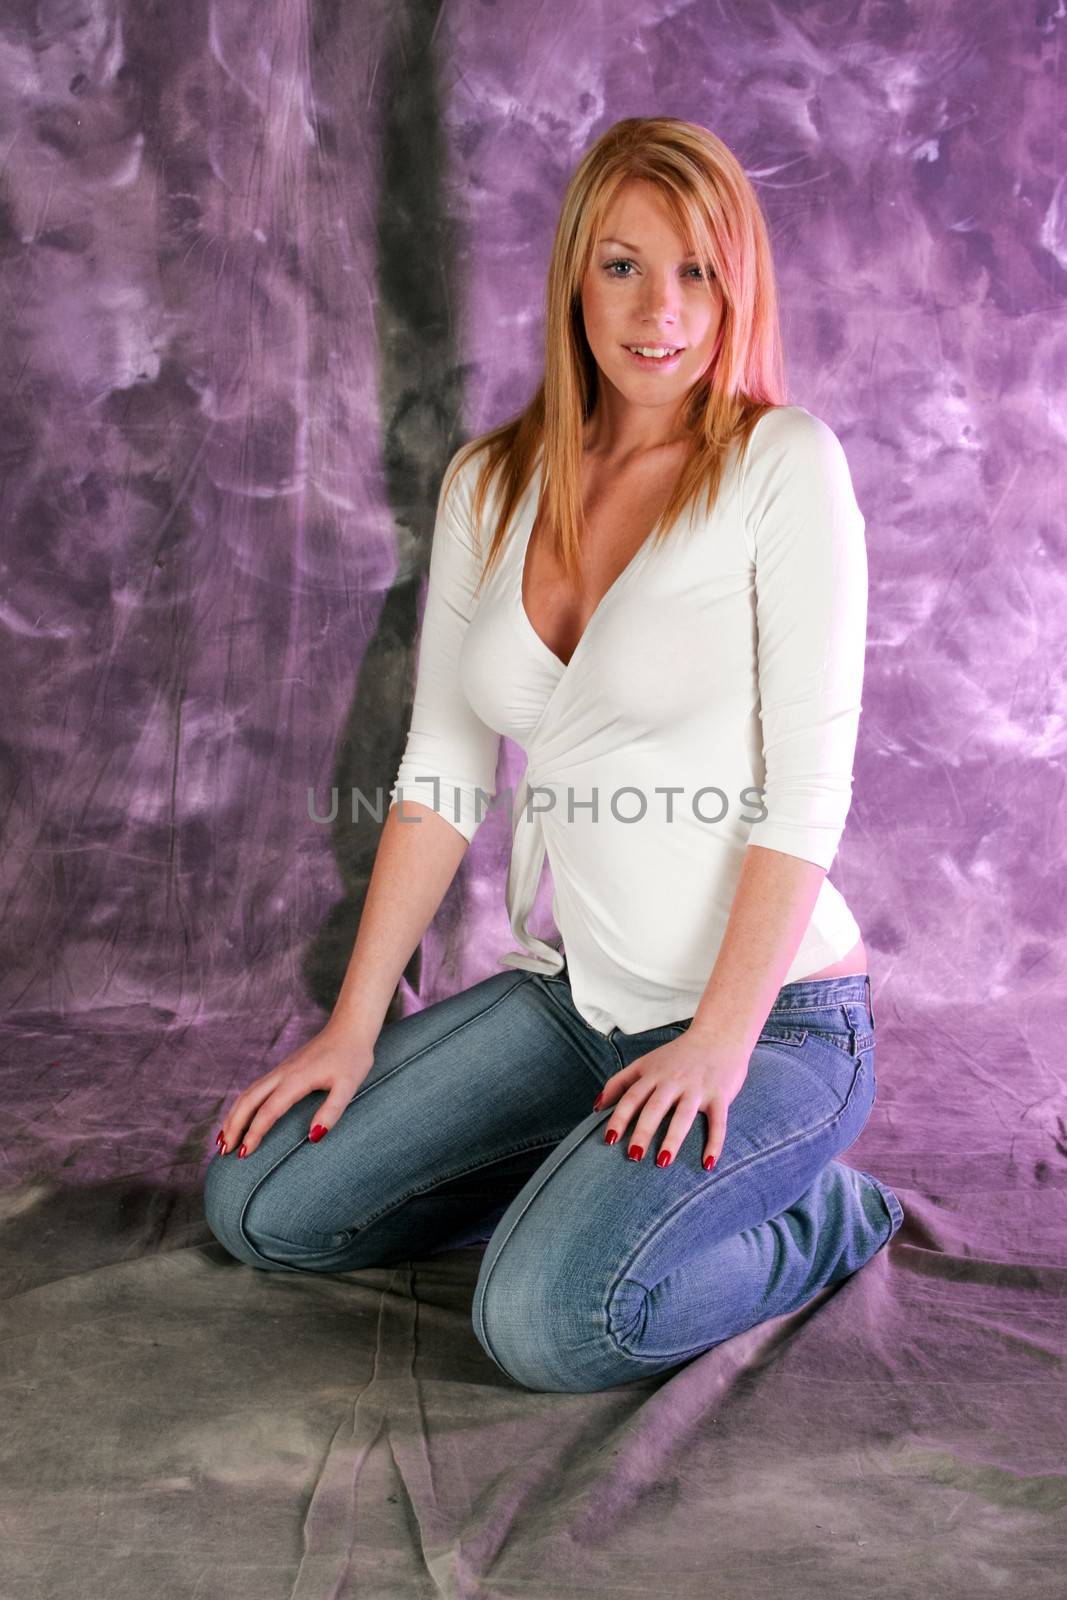 Beautiful blonde model sitting on her knees on the floor, facing the camera. The model is set against a purple background, which can be eliminated thanks to the clipping-path included in the JPG file.